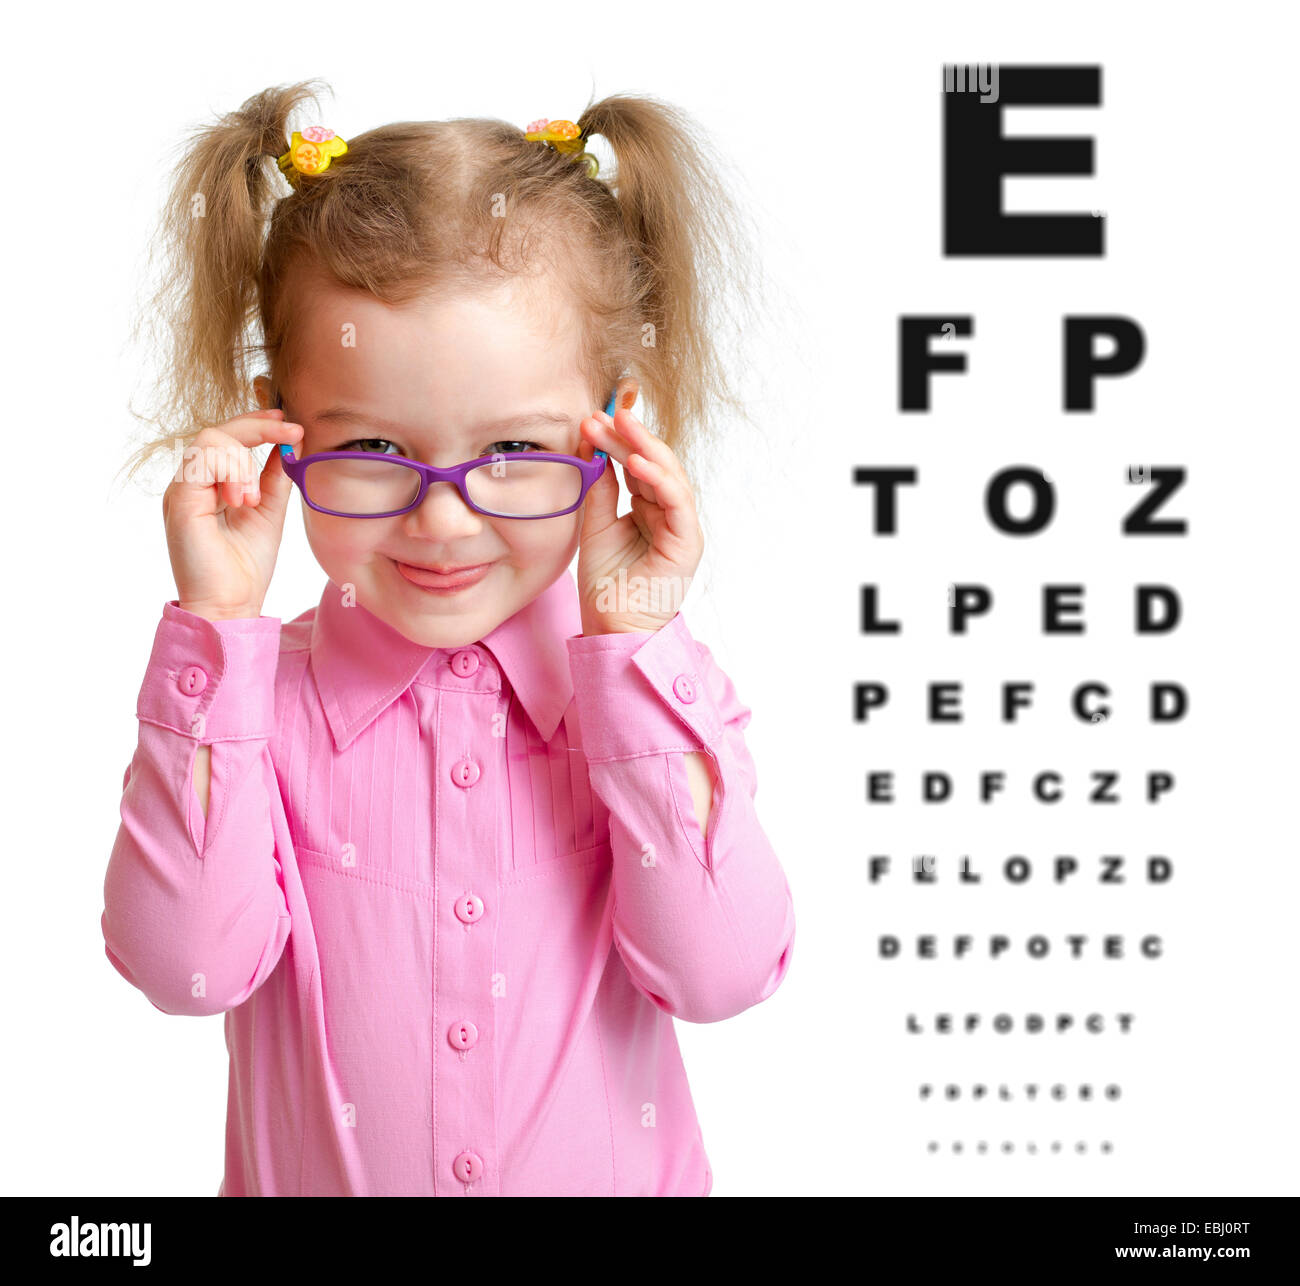 Smiling girl putting on glasses with blurry eye chart behind her Stock Photo